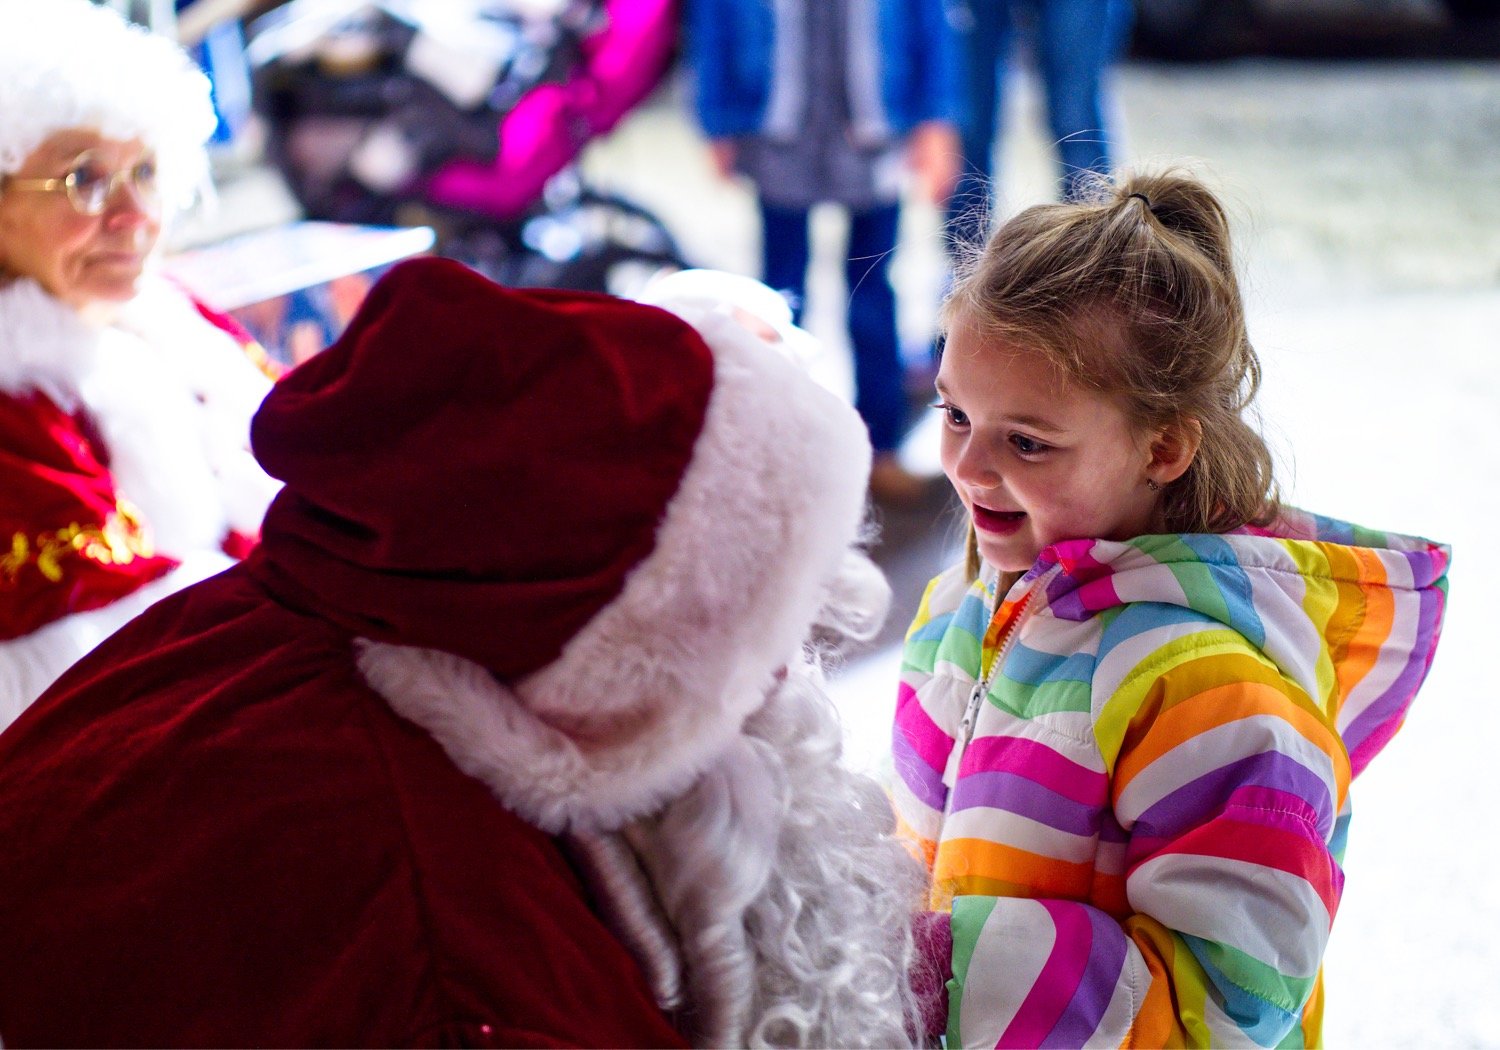 Kenley Deraad of Hawkins lets Santa know what she wants for Christmas at Quitman's 3rd annual Hometown Christmas event. [hometown Xmas highlights]